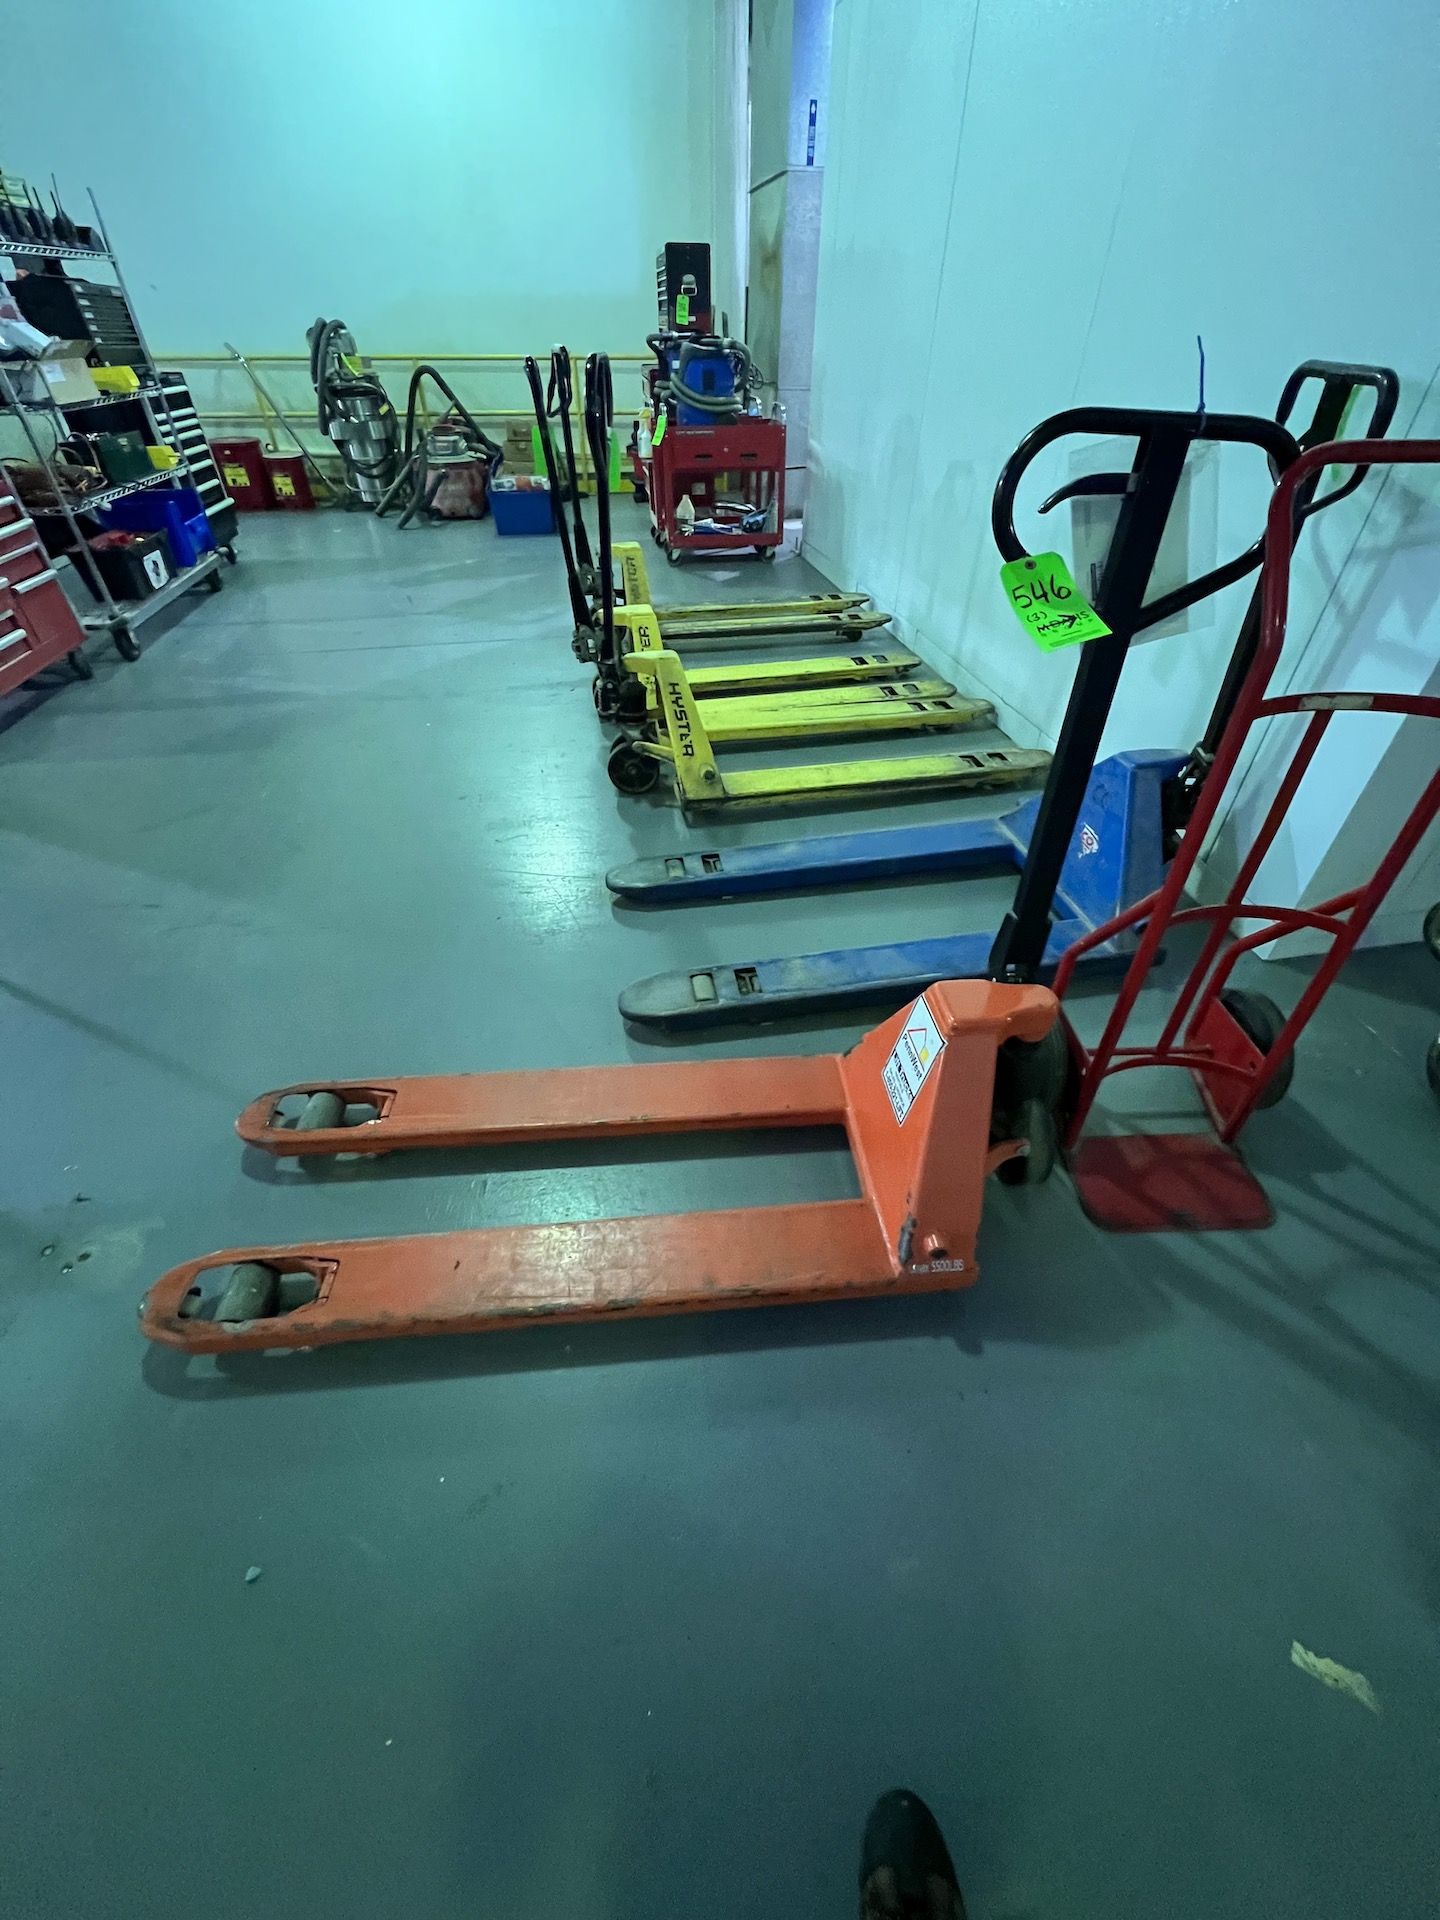 MATERIAL HANDLING EQUIPMENT, INCLUDES (2) 2-WHEEL DOLLIES AND HYDRAULIC PALLET JACK - Image 2 of 6